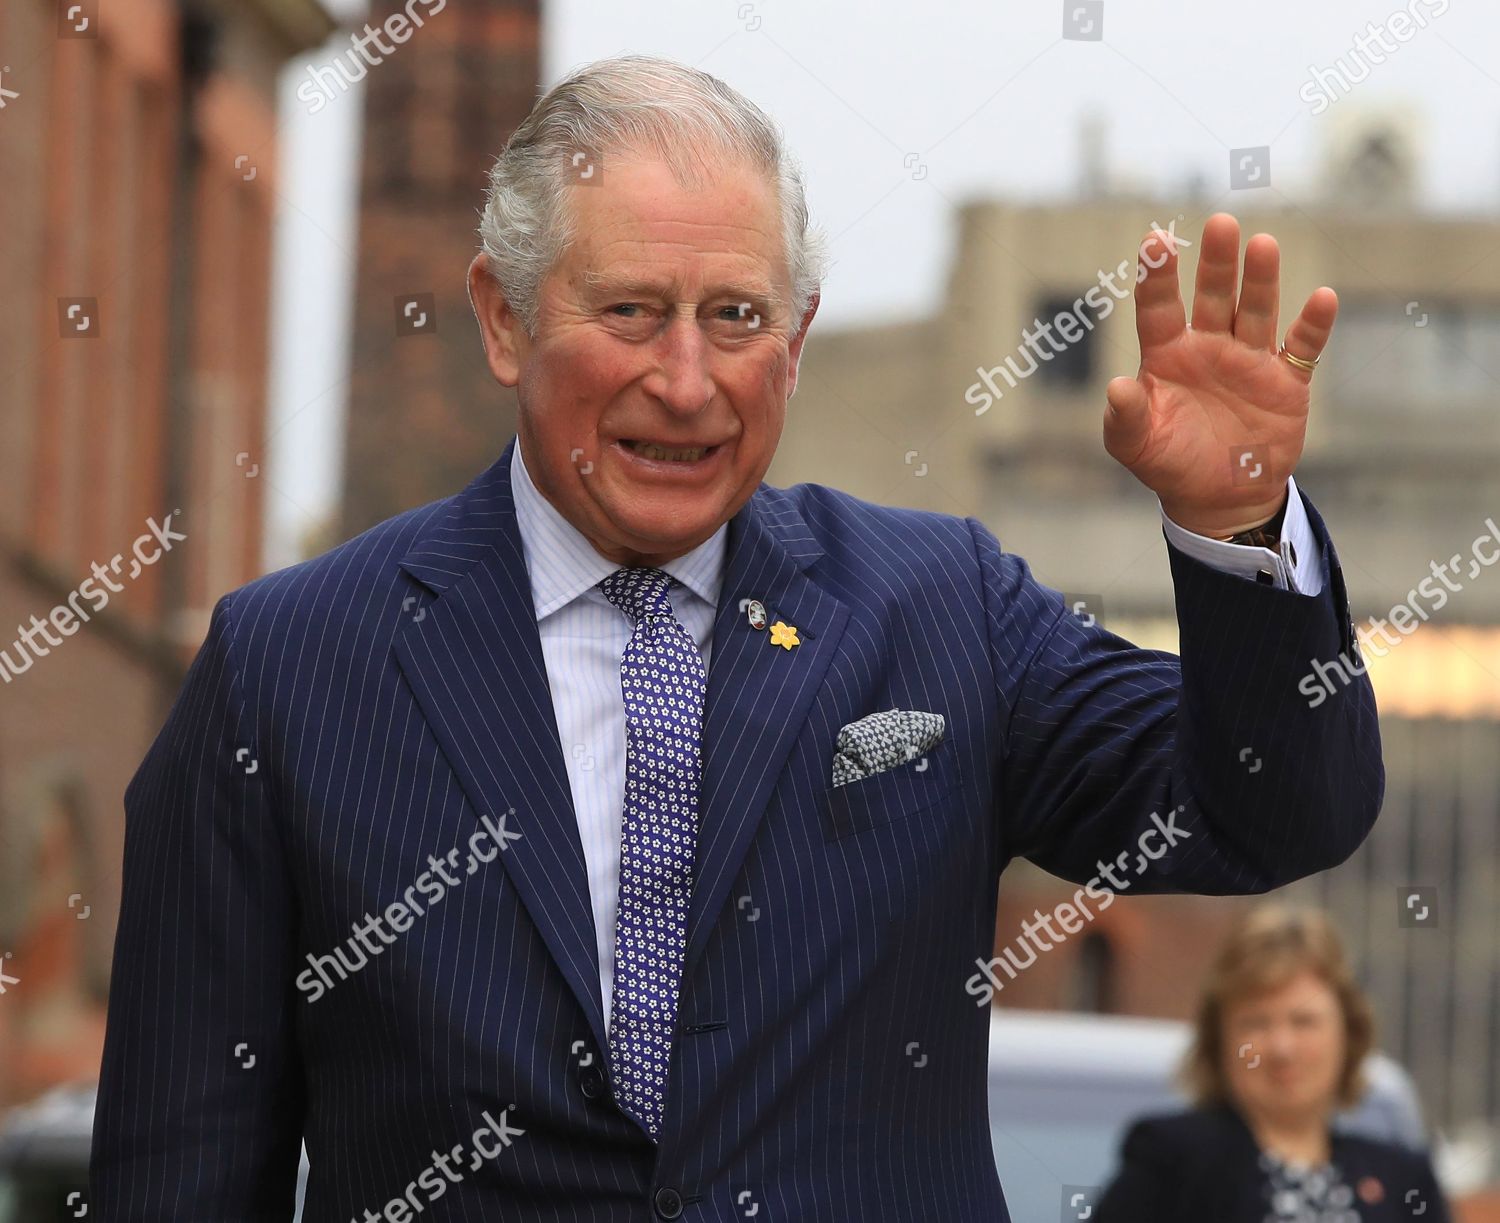 prince-charles-and-duchess-of-cornwall-visit-liverpool-uk-shutterstock-editorial-10102607e.jpg